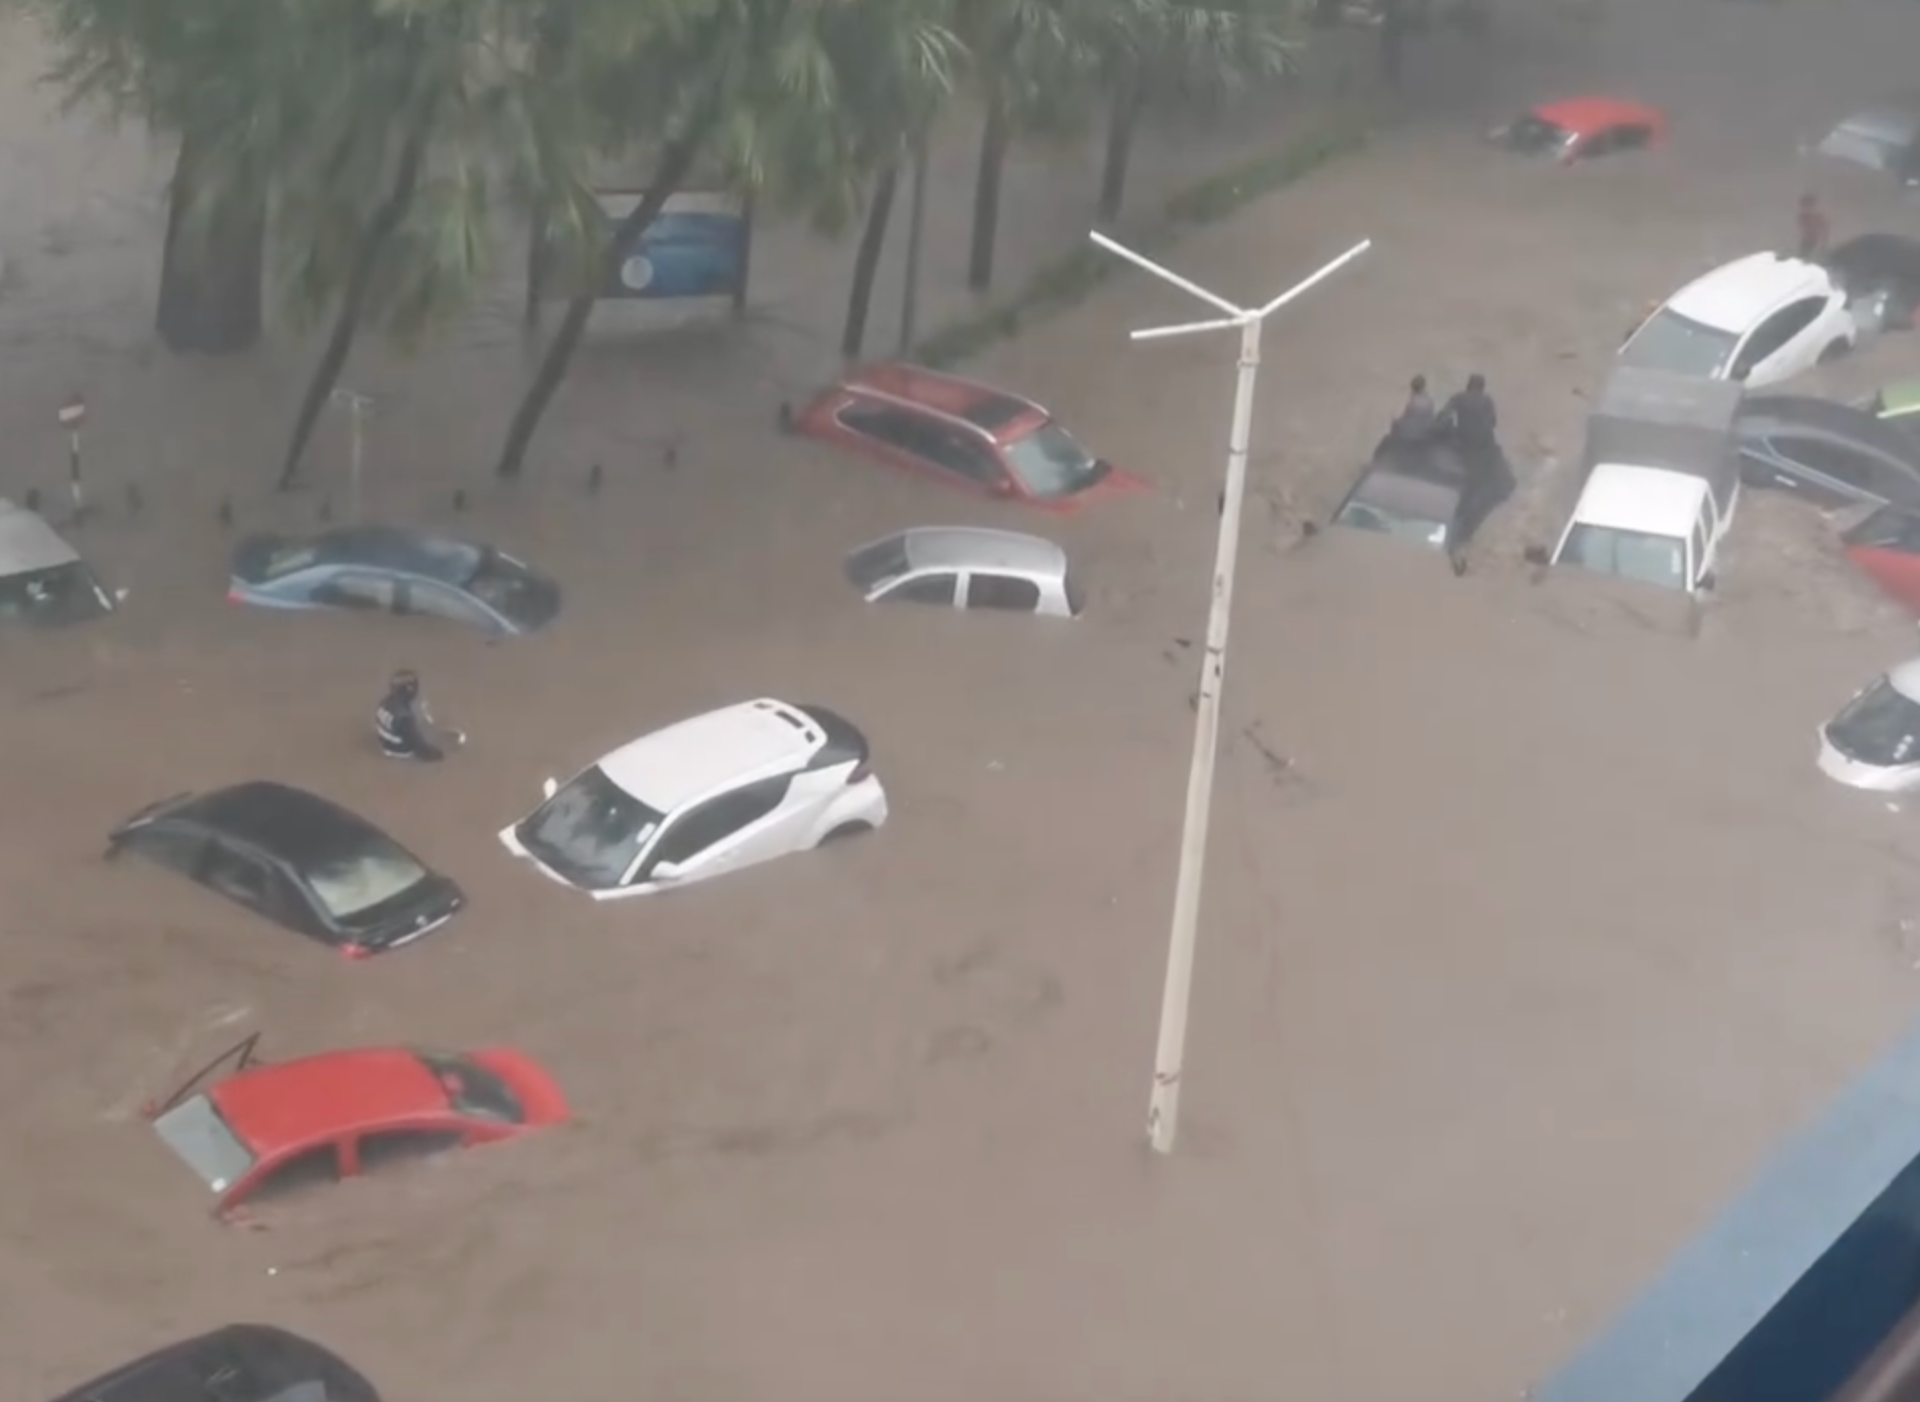 Flash floods in Mauritius | Climate News